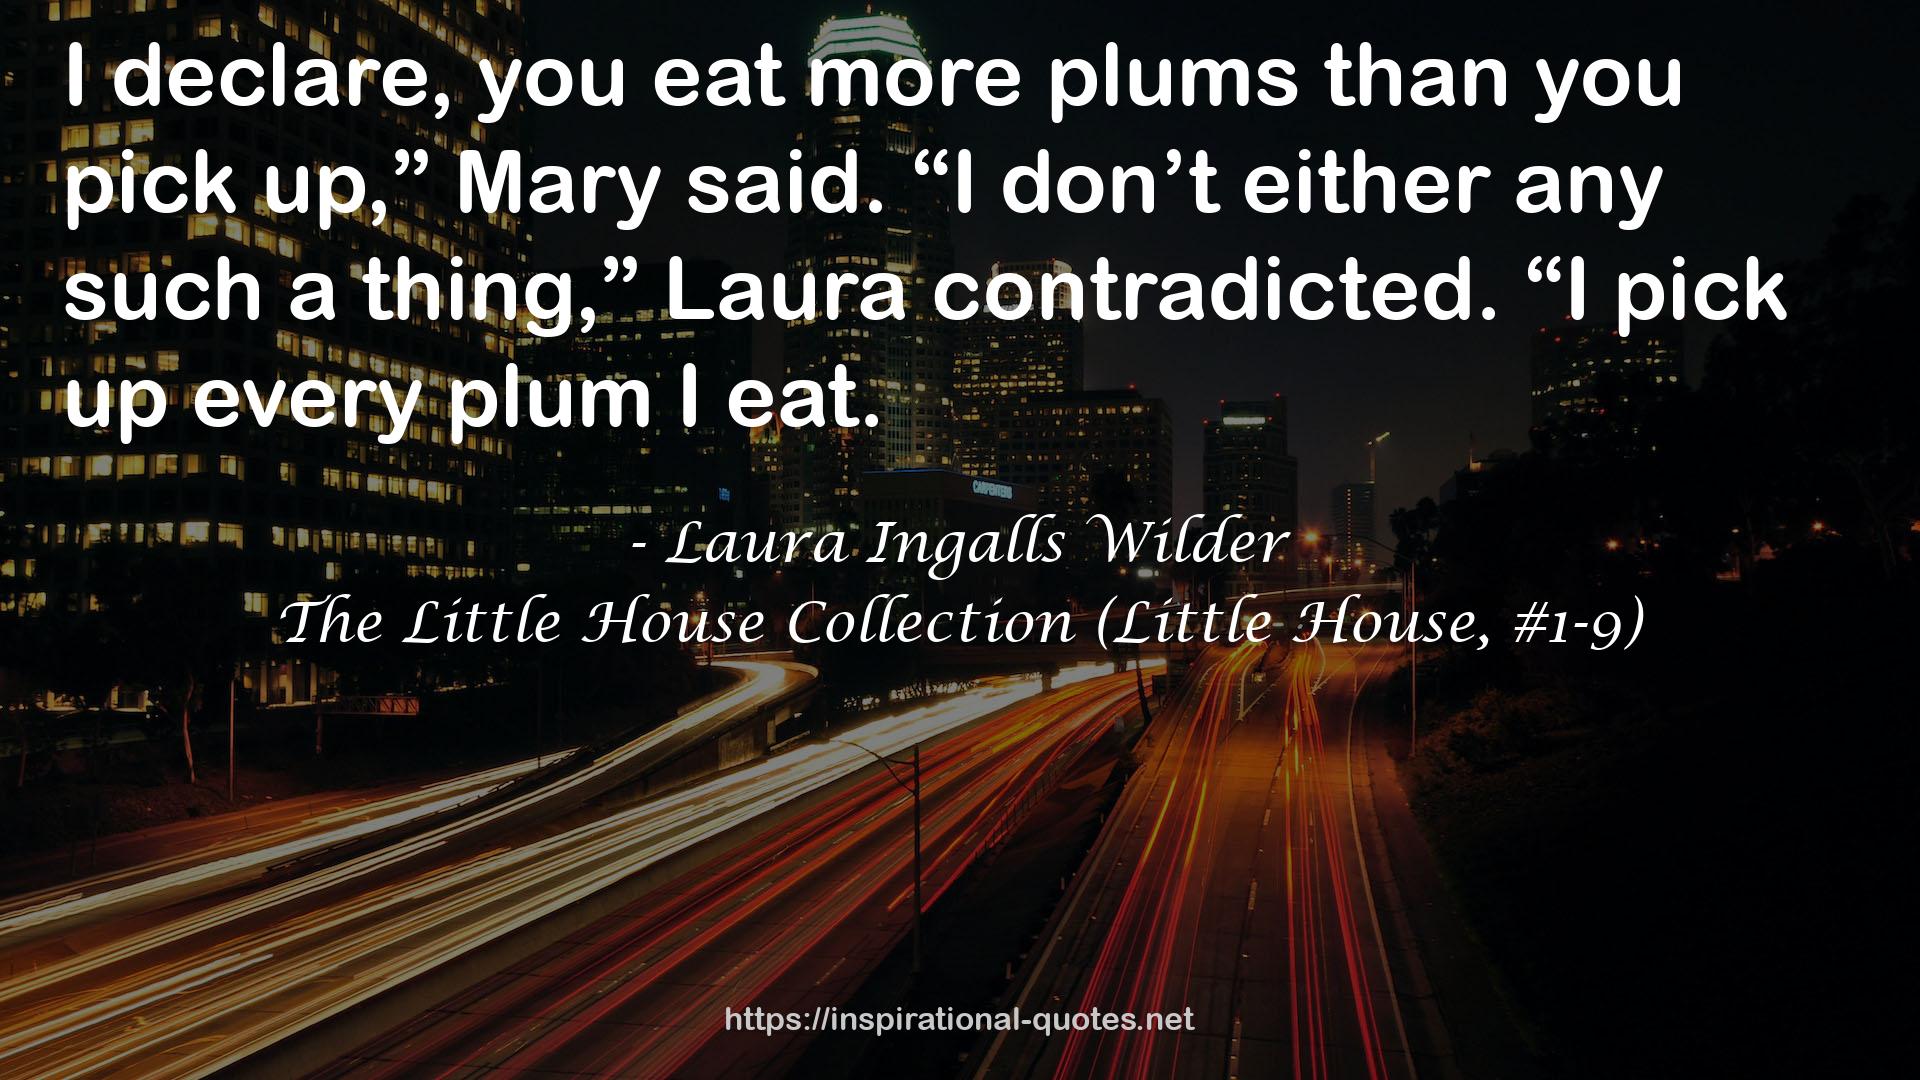 The Little House Collection (Little House, #1-9) QUOTES